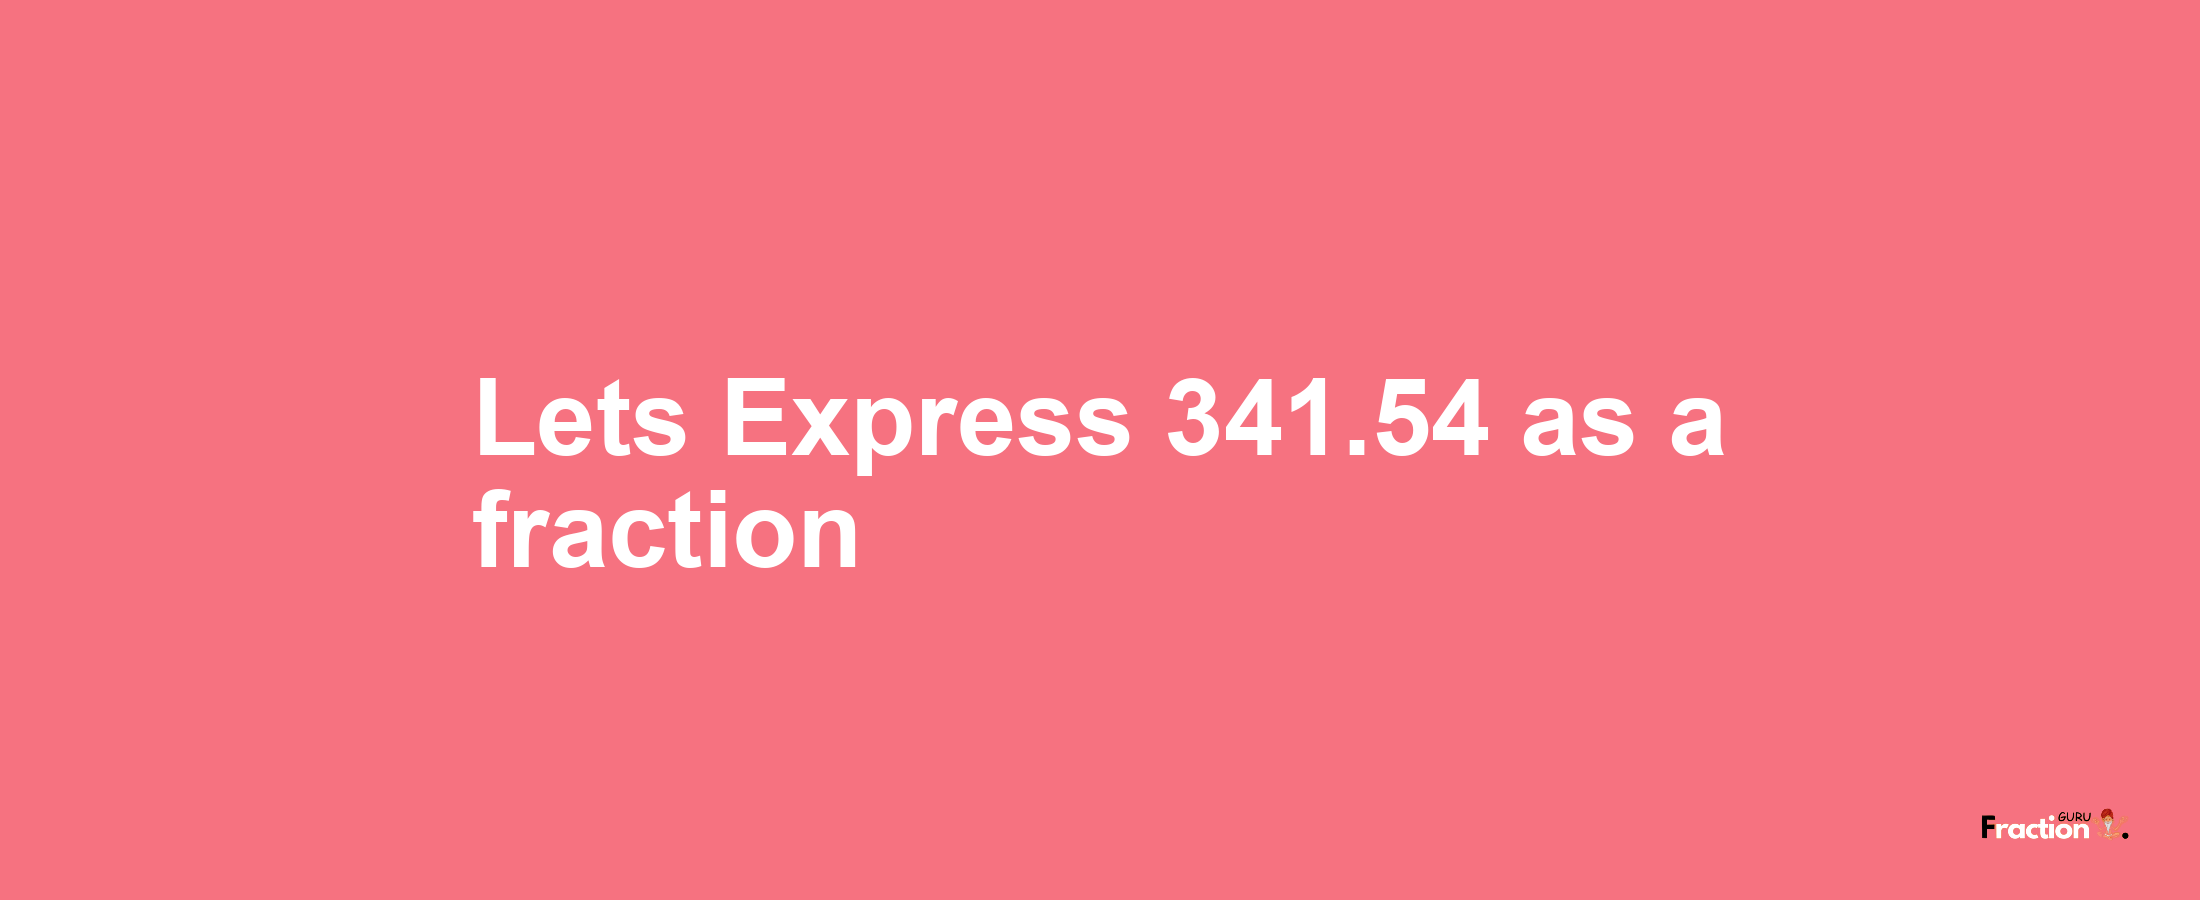 Lets Express 341.54 as afraction